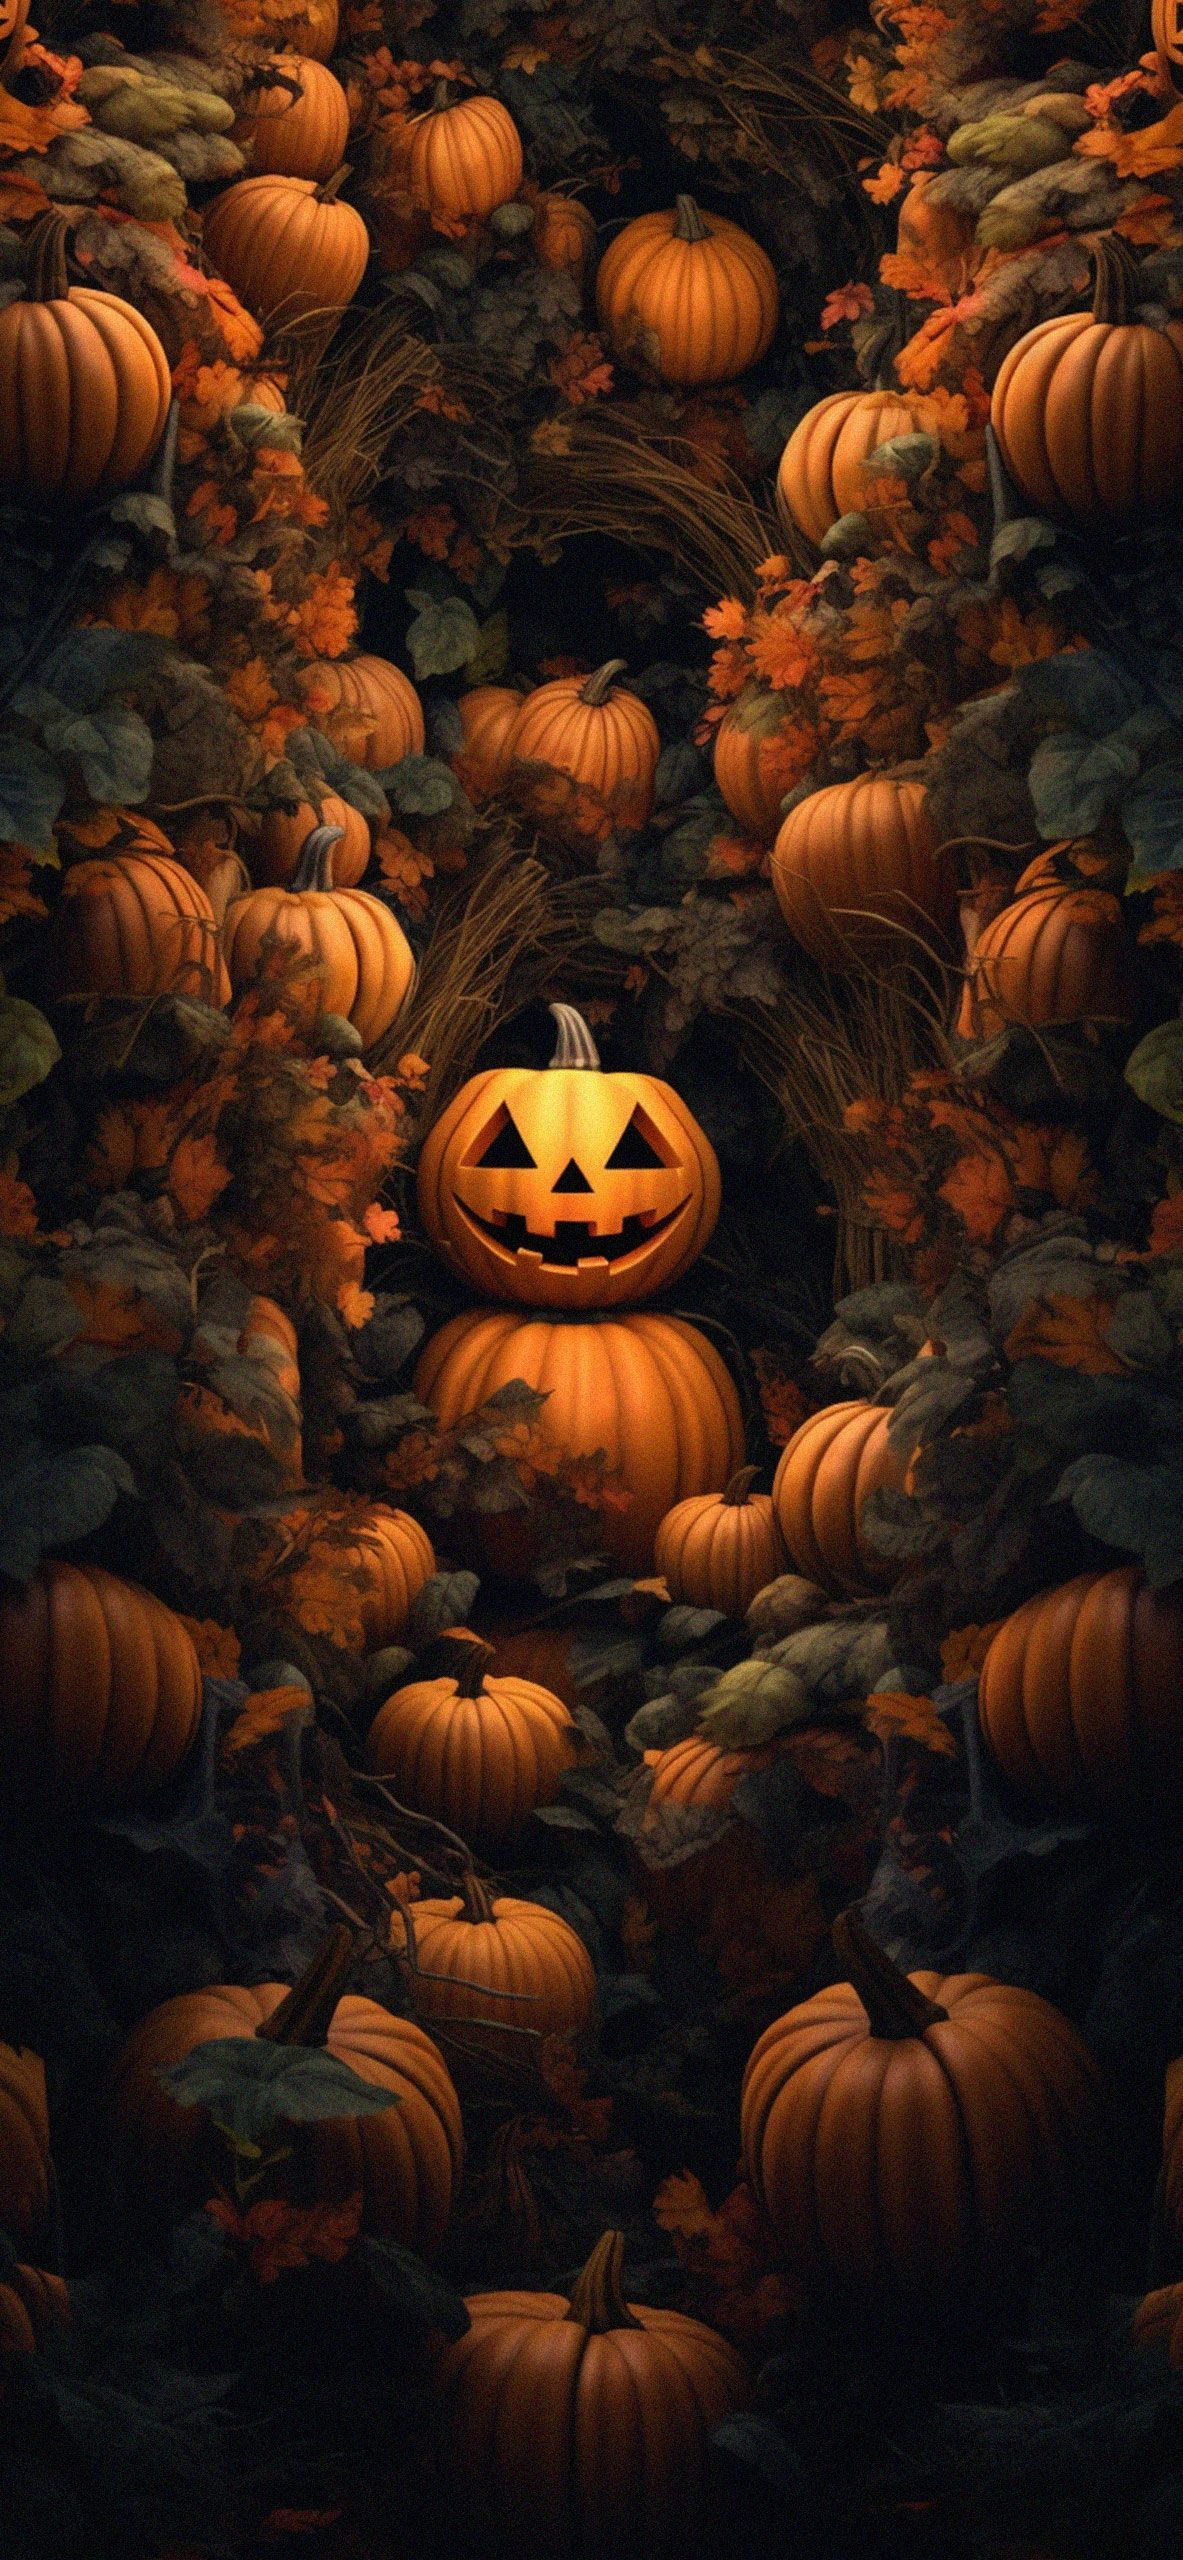 A pumpkin with a carved smile and a candle inside surrounded by many other pumpkins and fall leaves. - Halloween, pumpkin